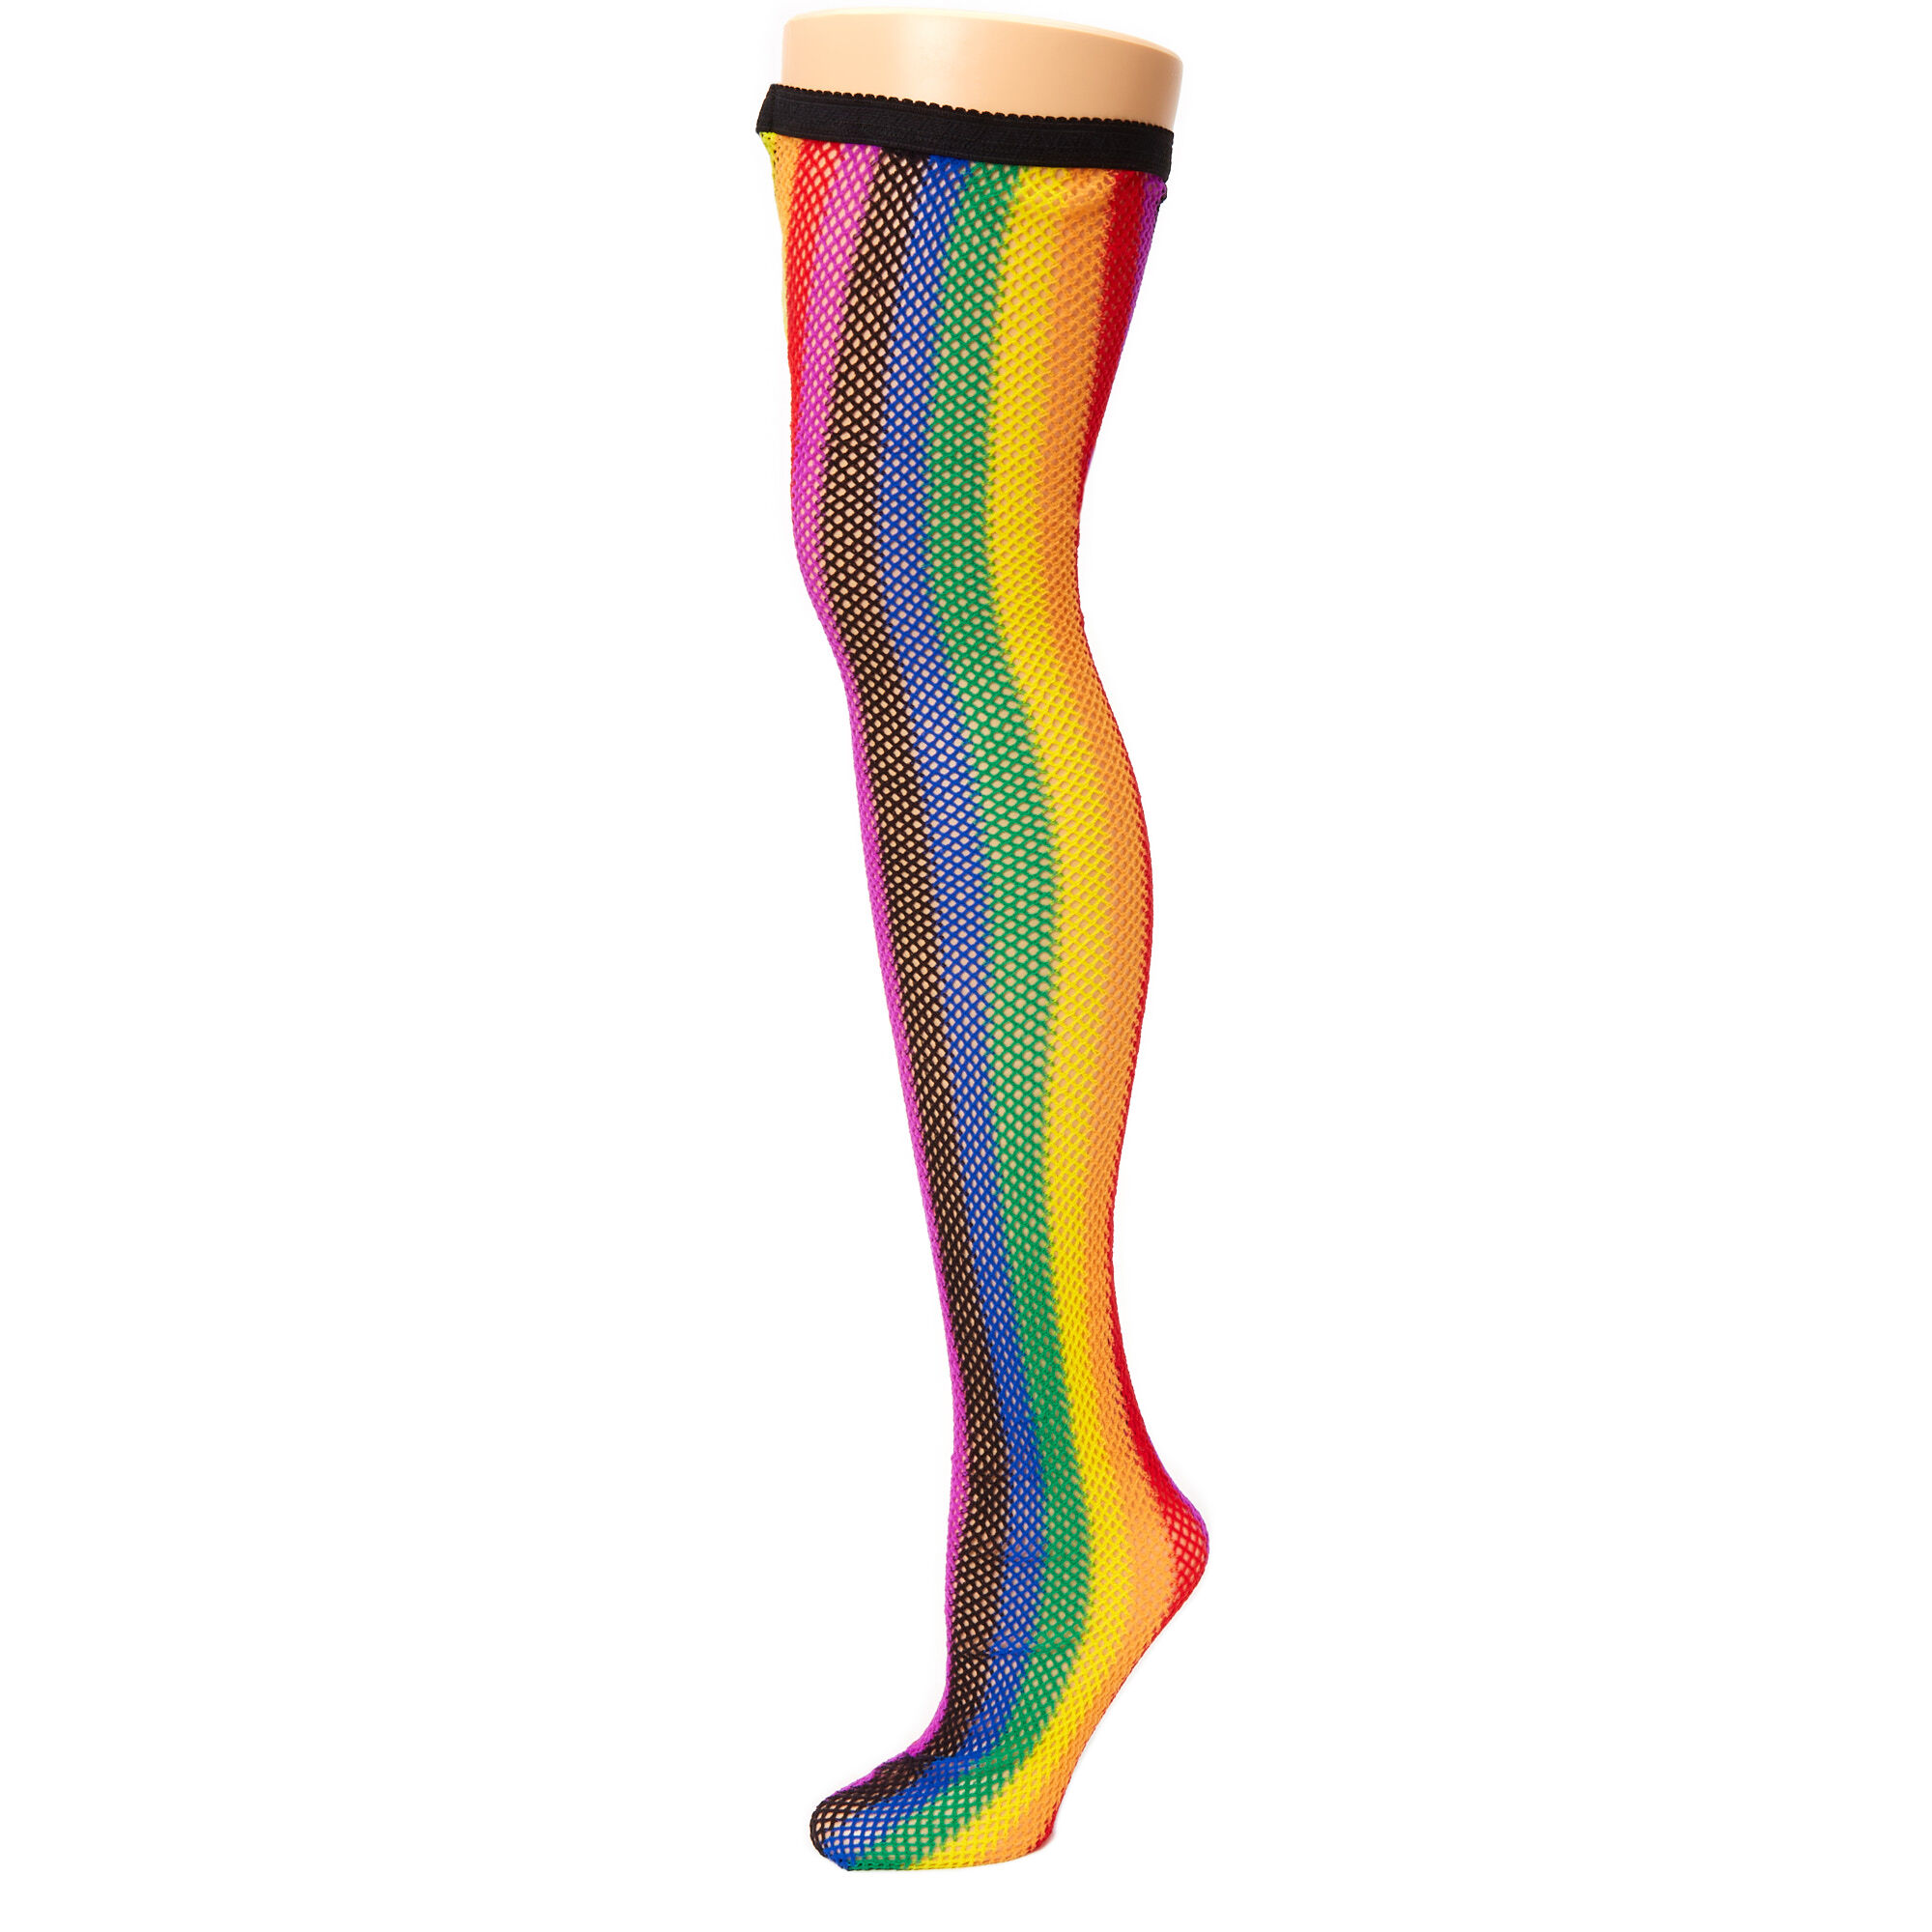 View Claires Fishnet Over The Knee Socks Rainbow Black information